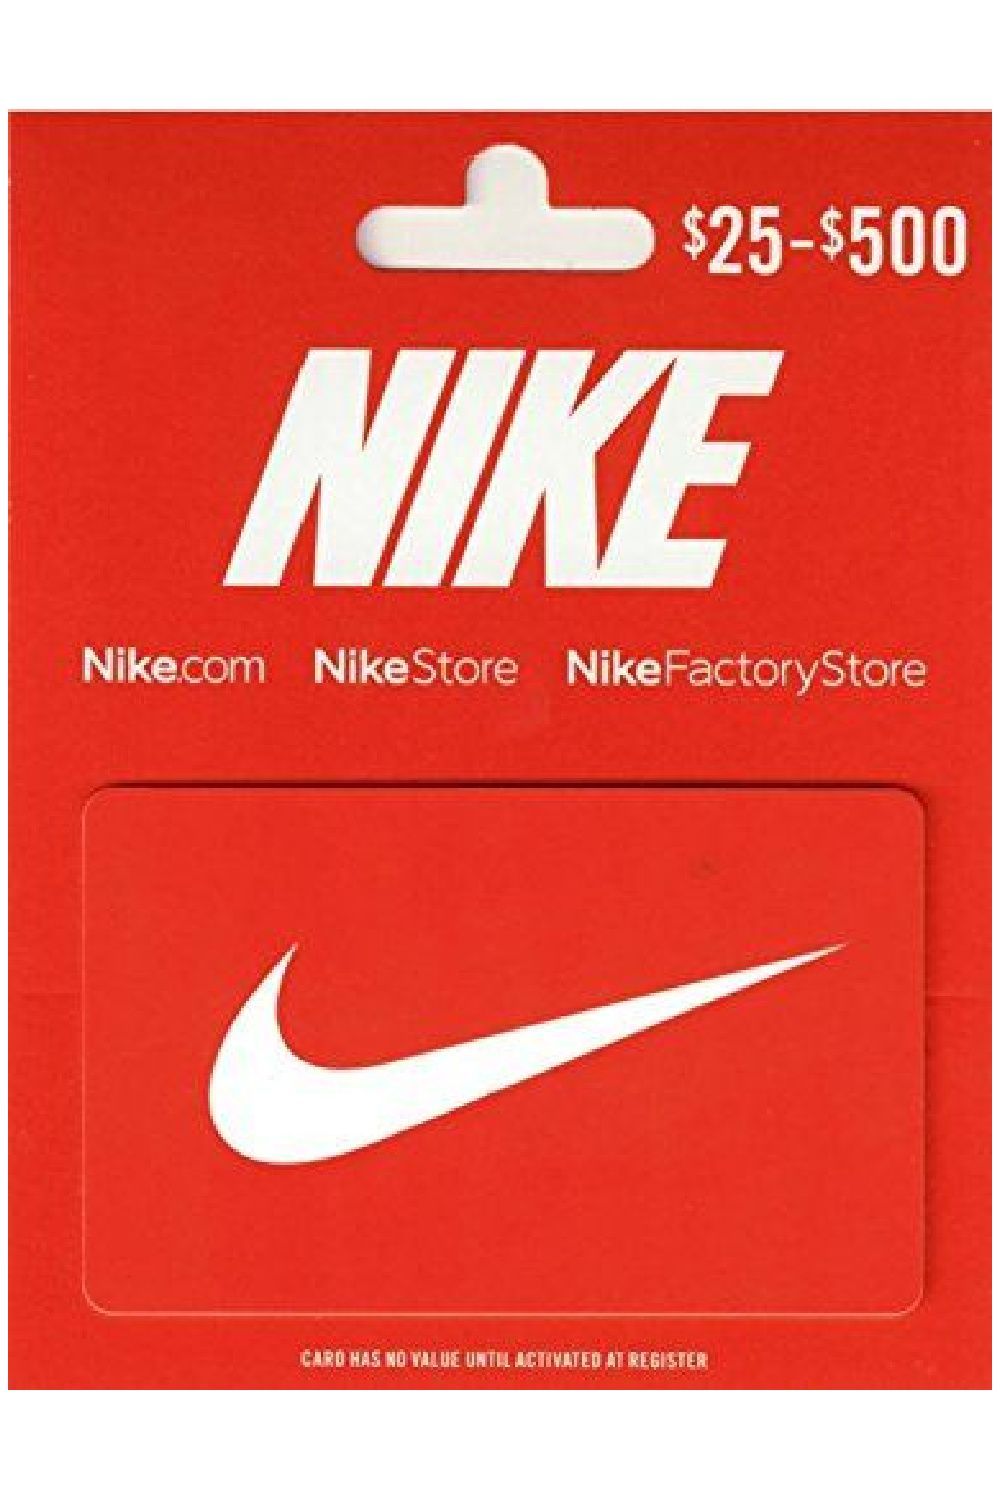 where can i spend nike gift card